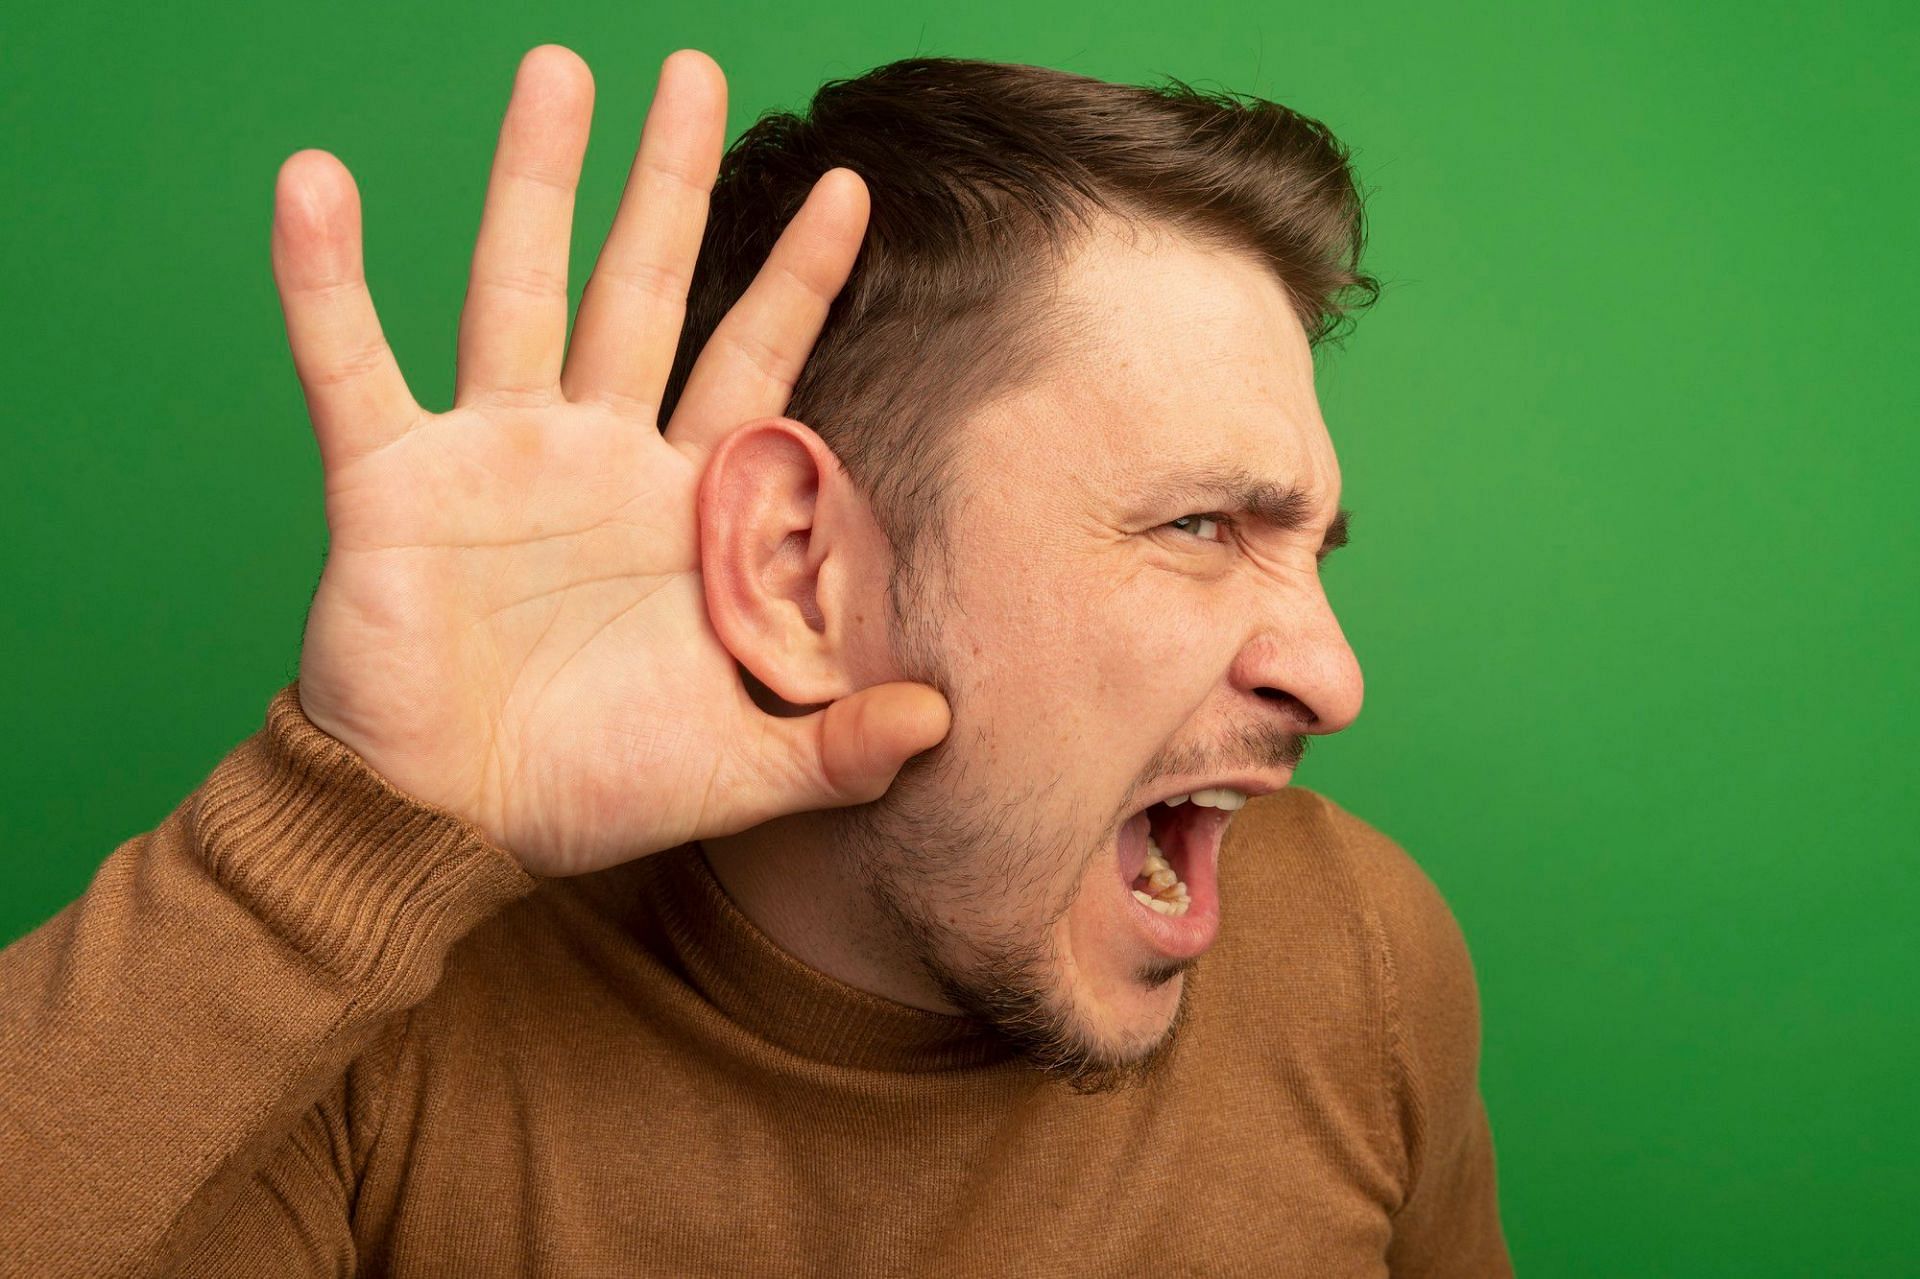 The Red Ear Syndrome can make your ears reddish and painful (Image by stockking on Freepik)